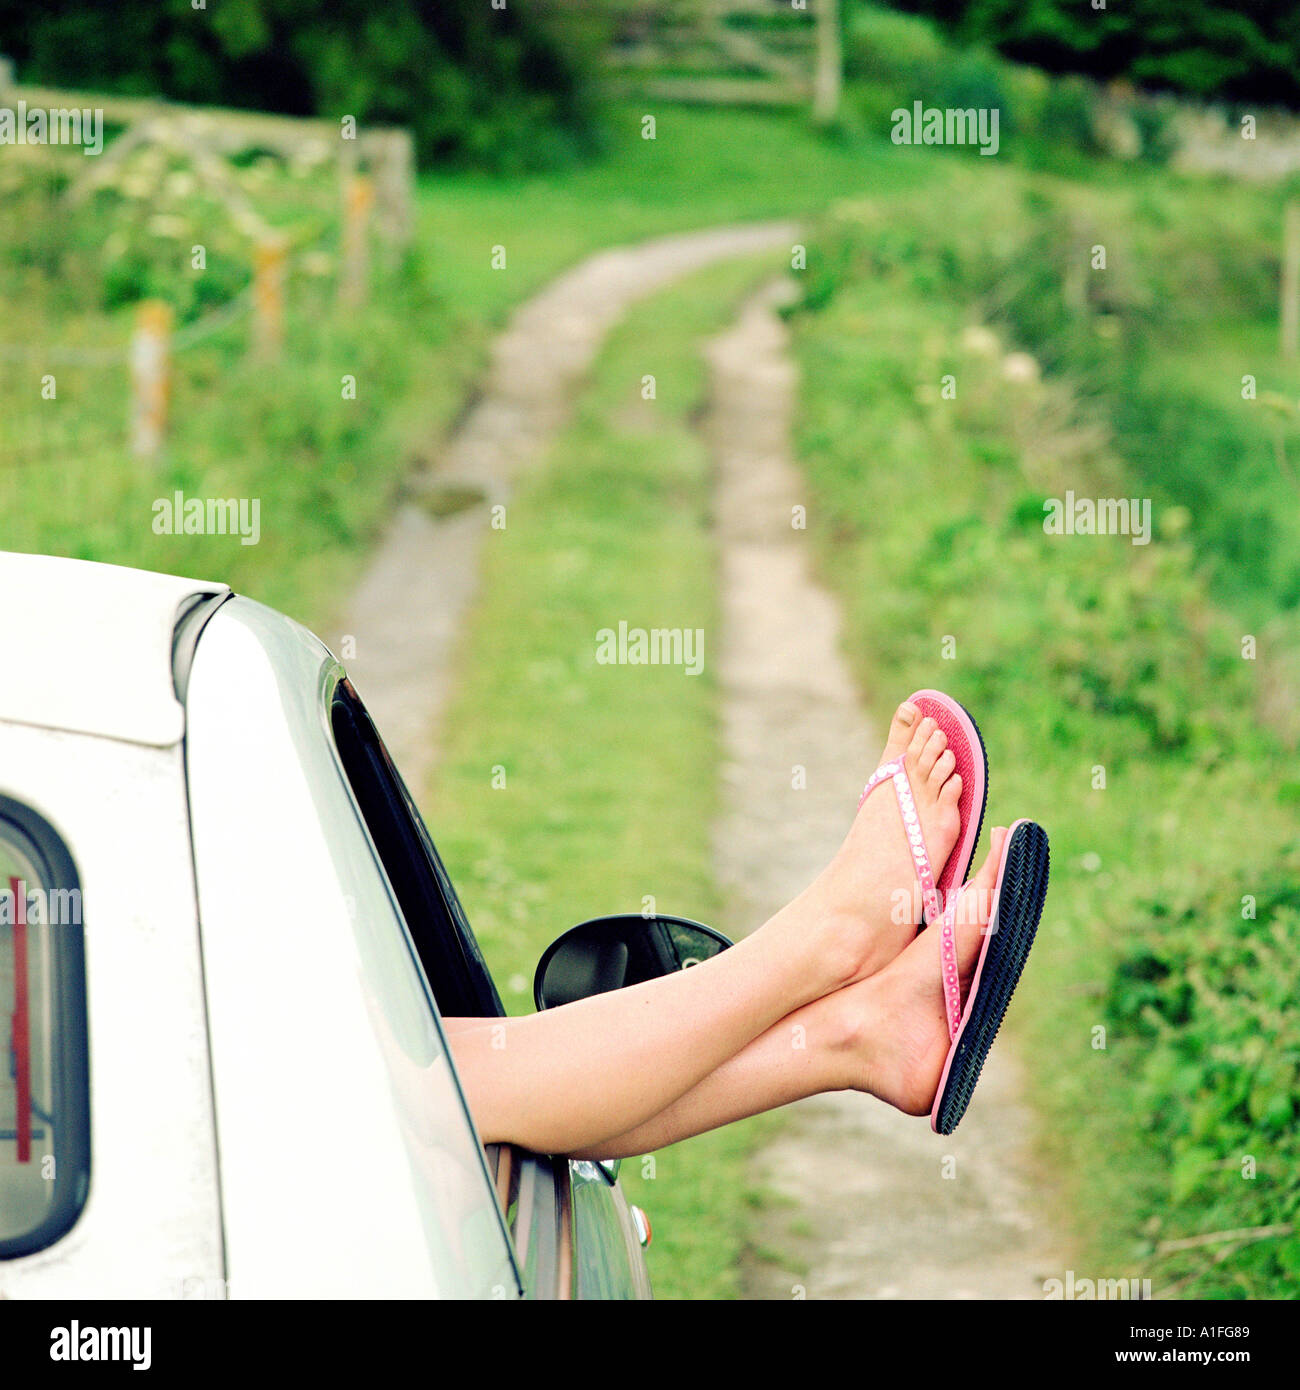 Woman's feet sticking out of a car window Stock Photo